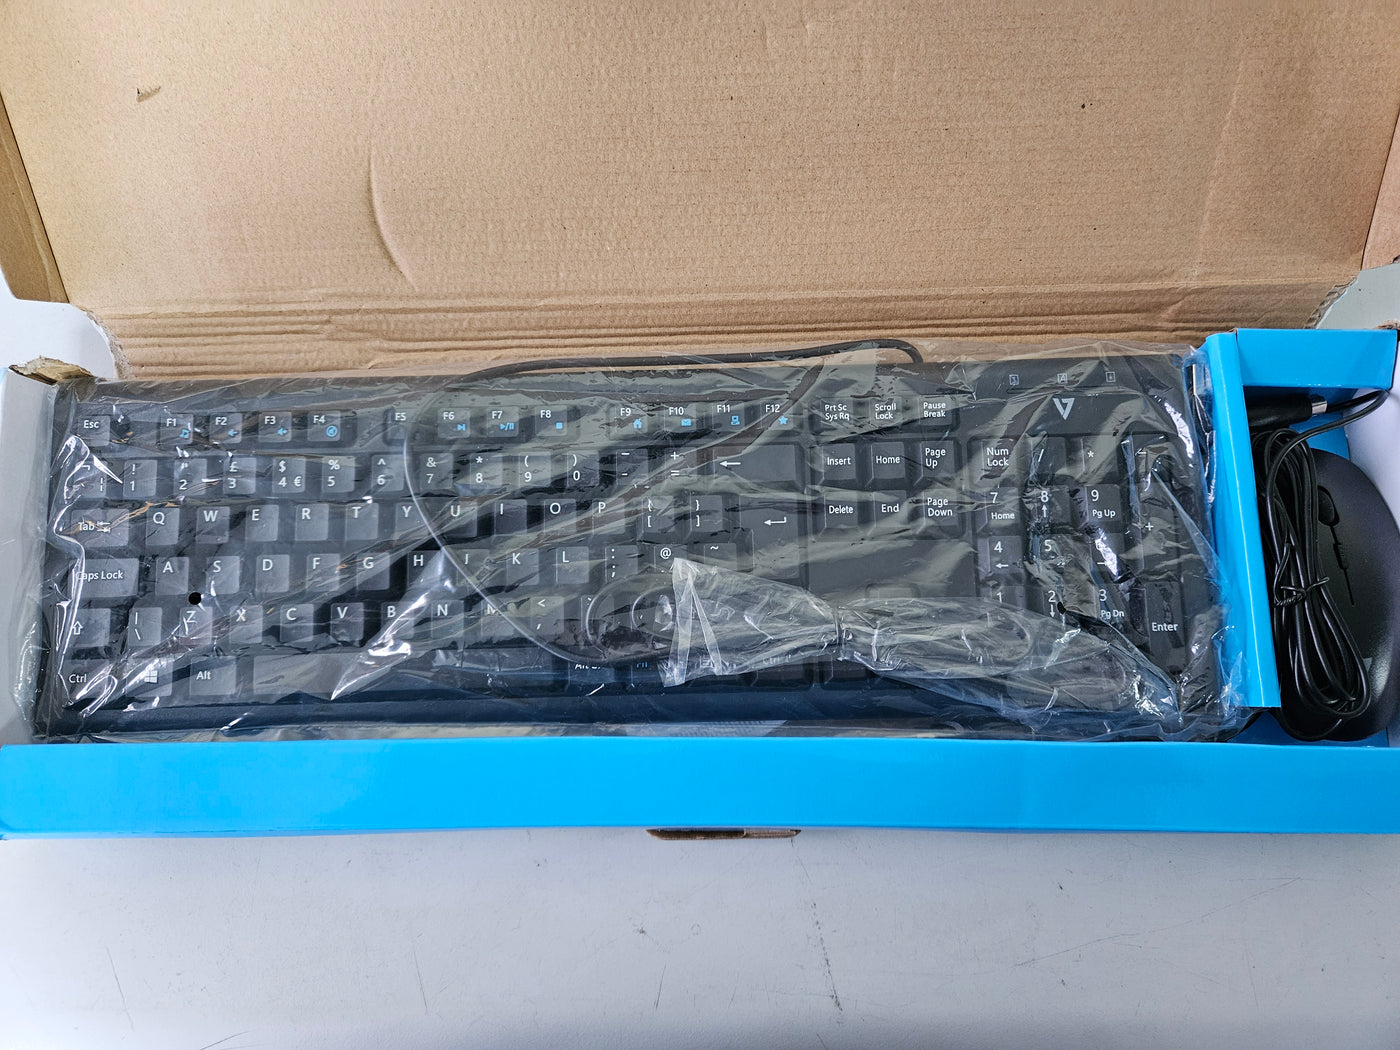 V7 USB Wired Keyboard and Mouse Combo ( CKU200UK ) NOB